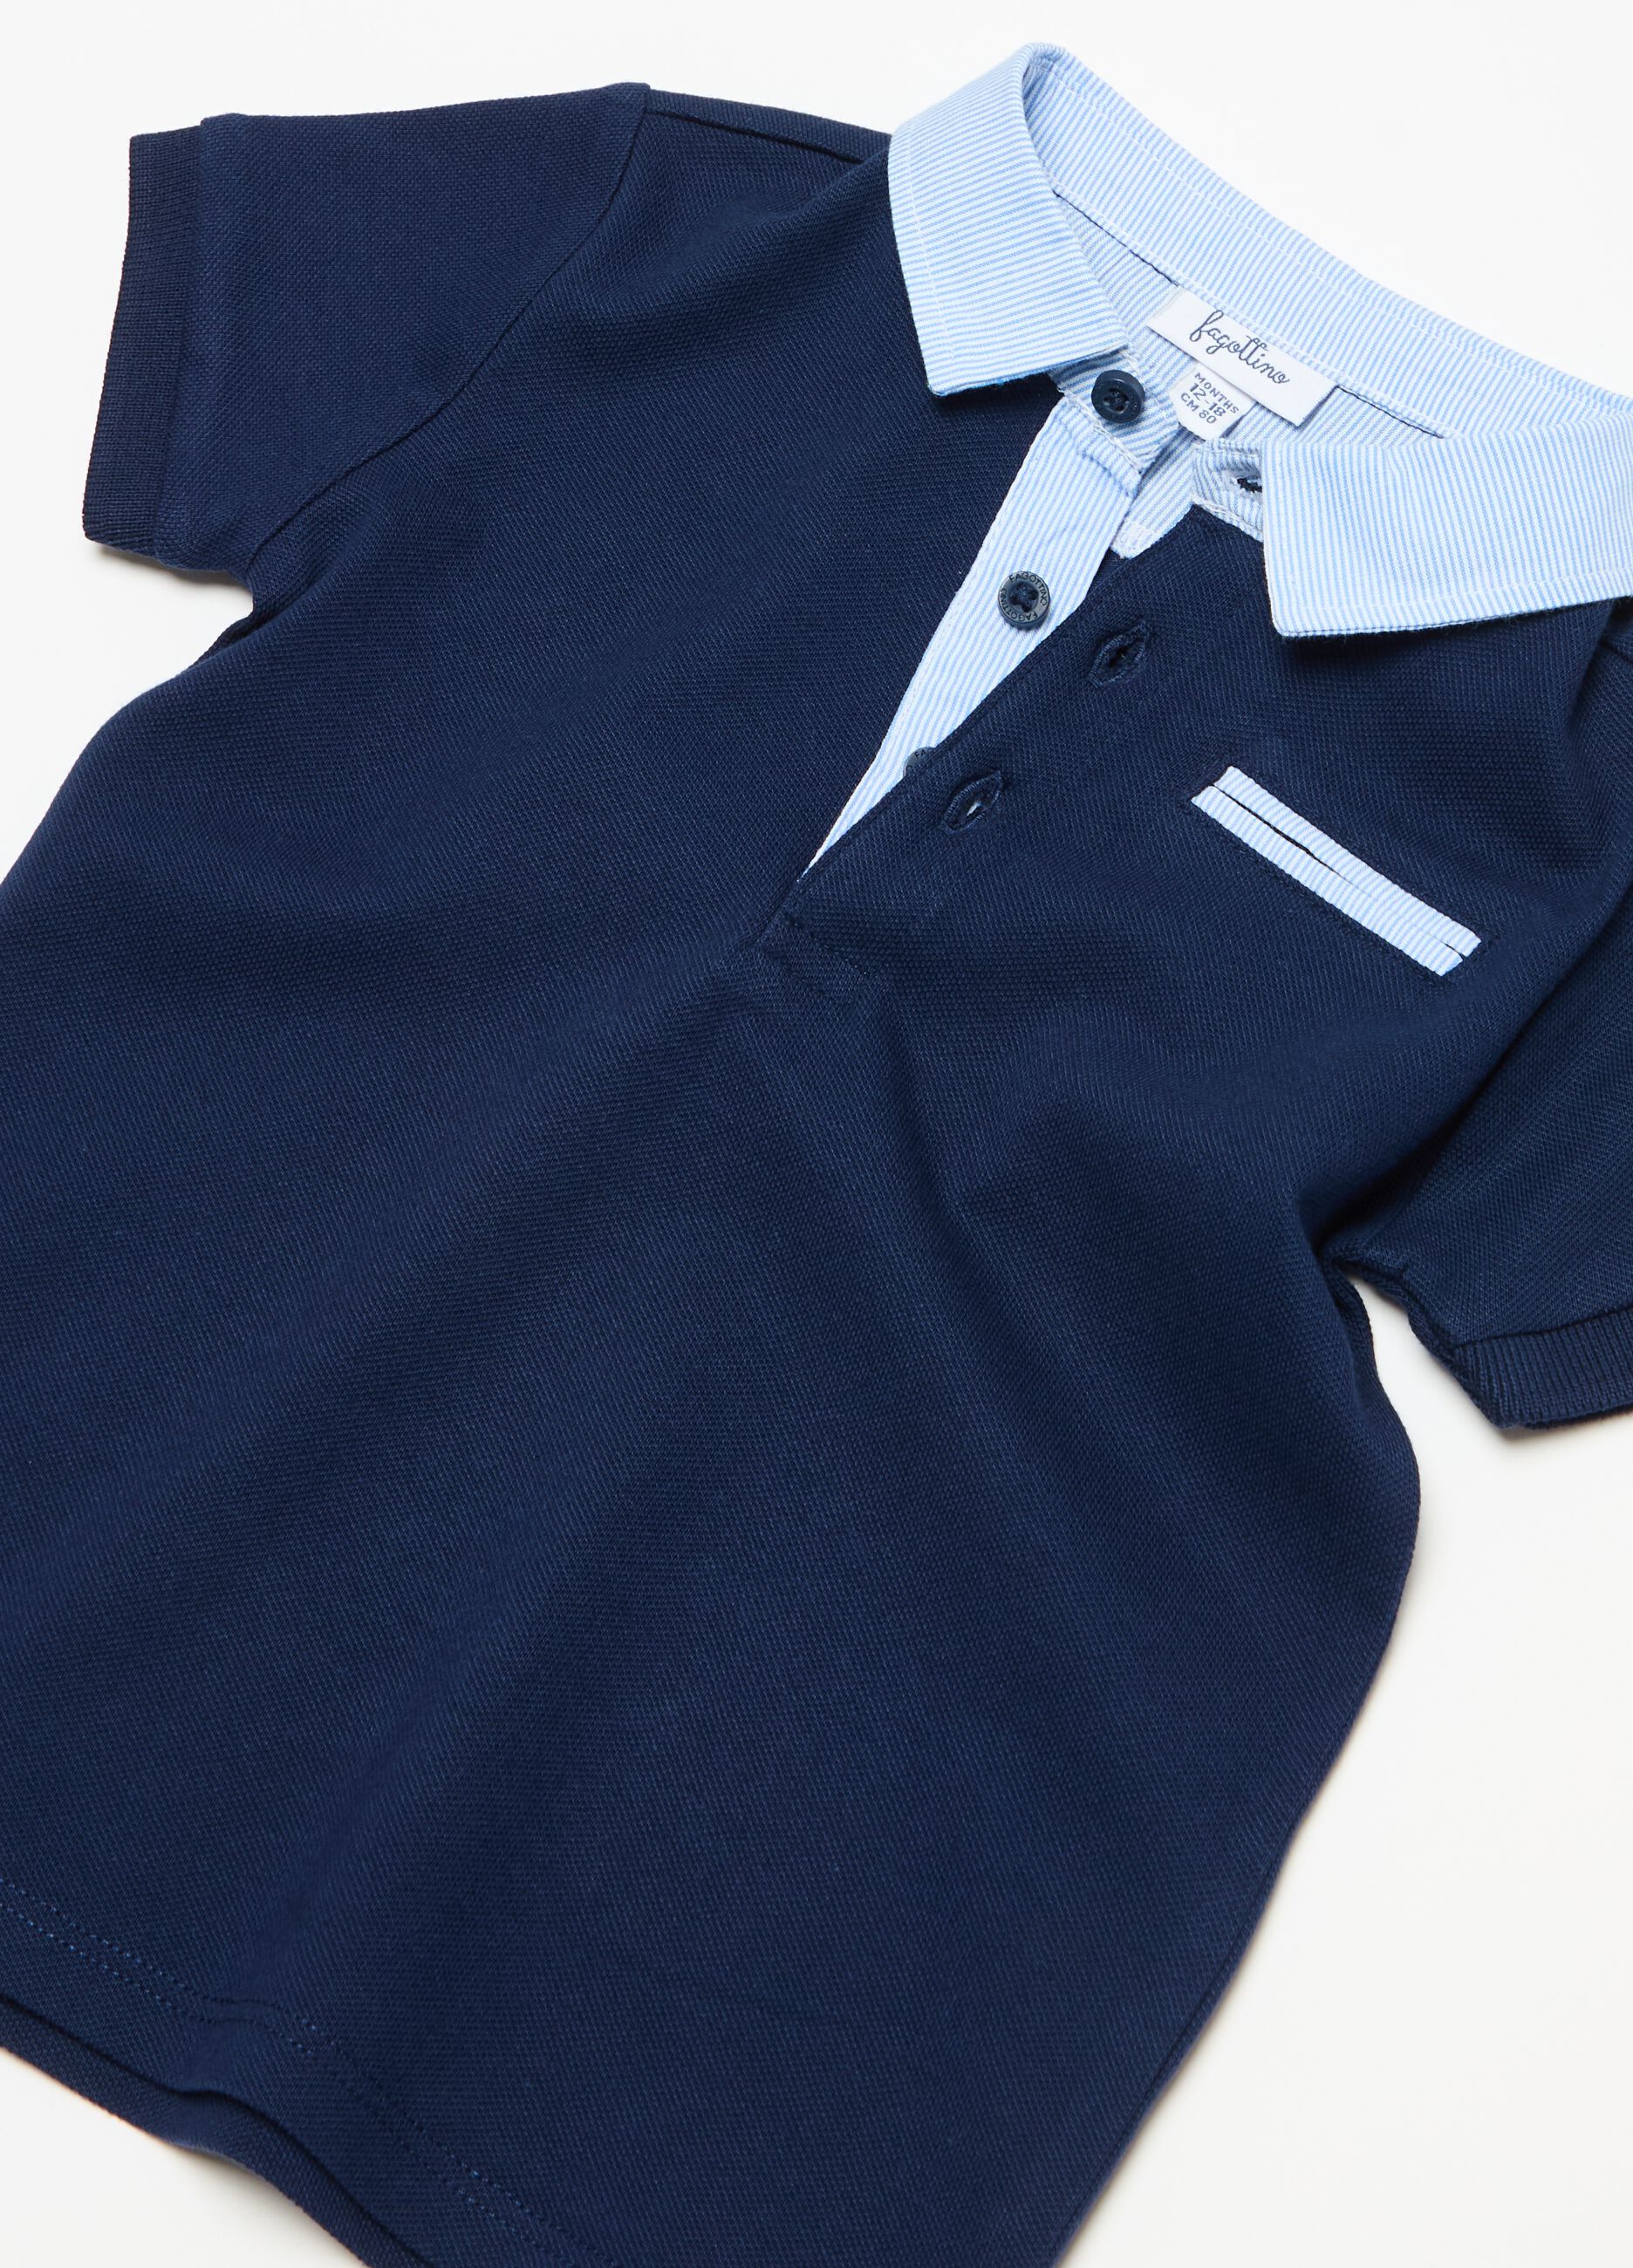 Piquet polo shirt with striped details